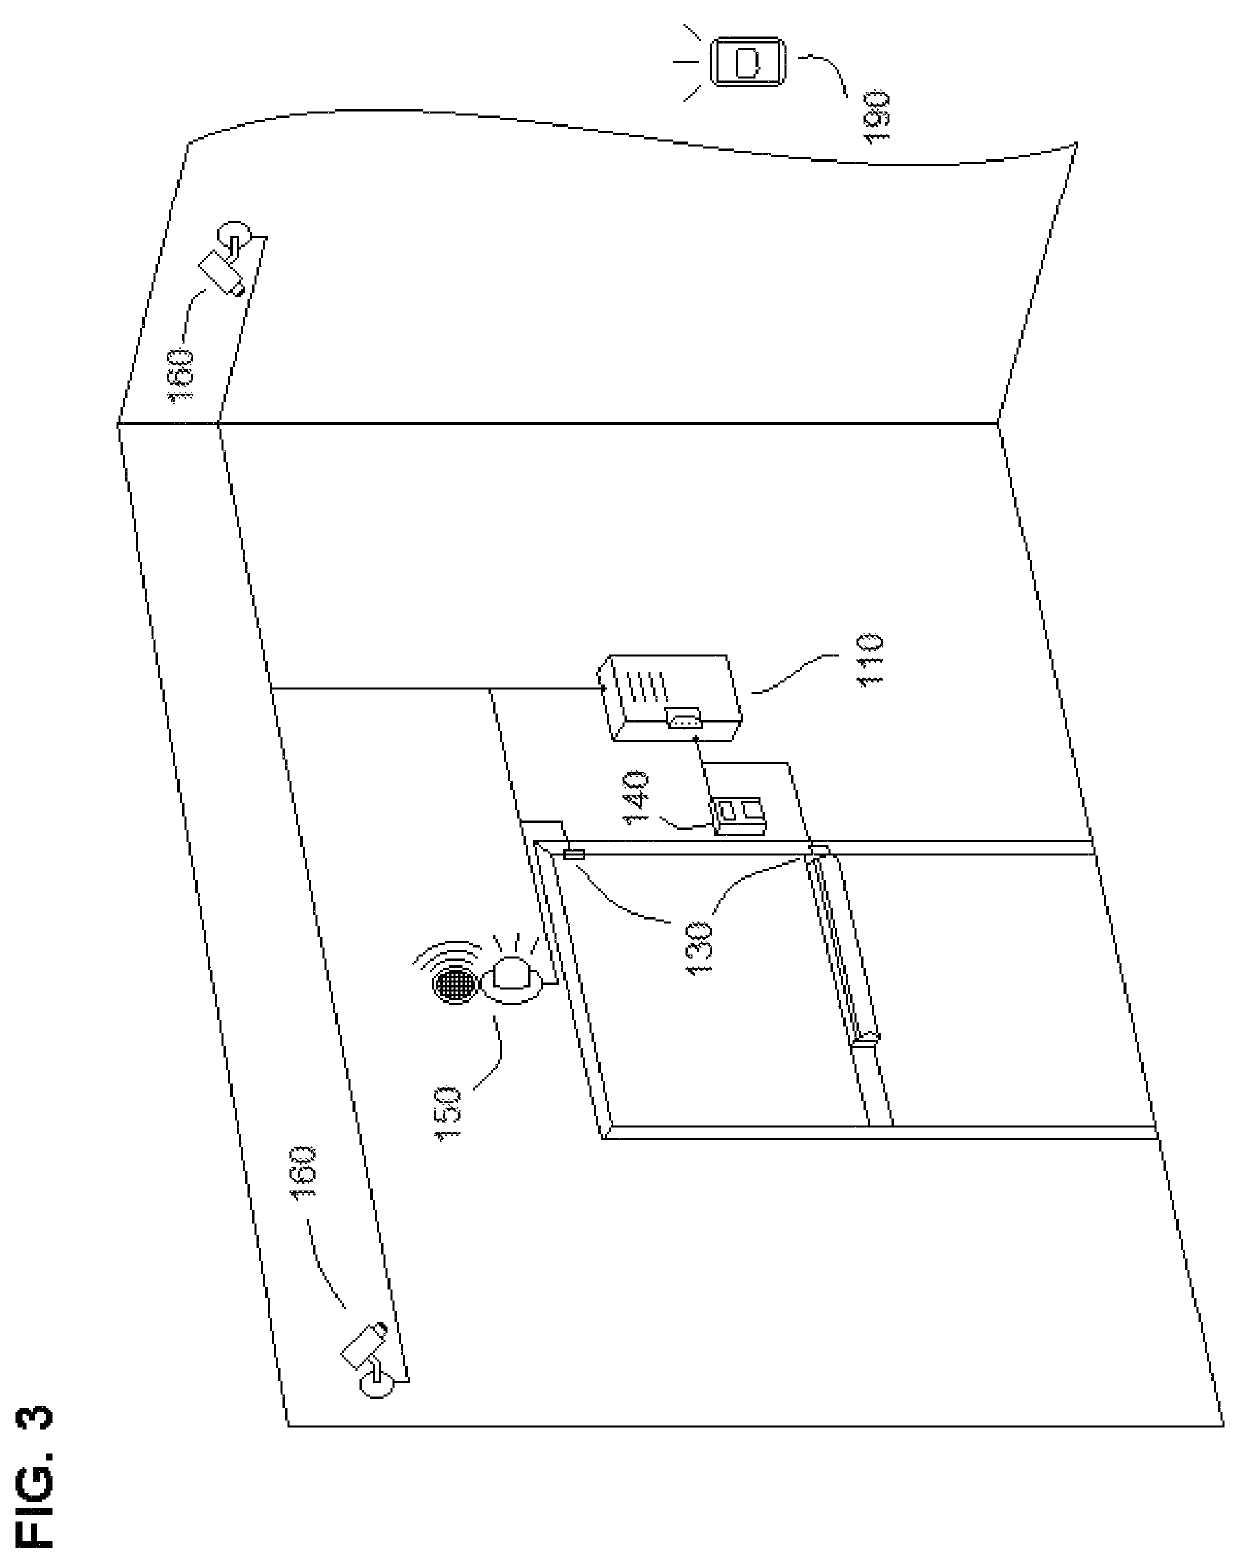 Service entrance alarm system and methods of using the same